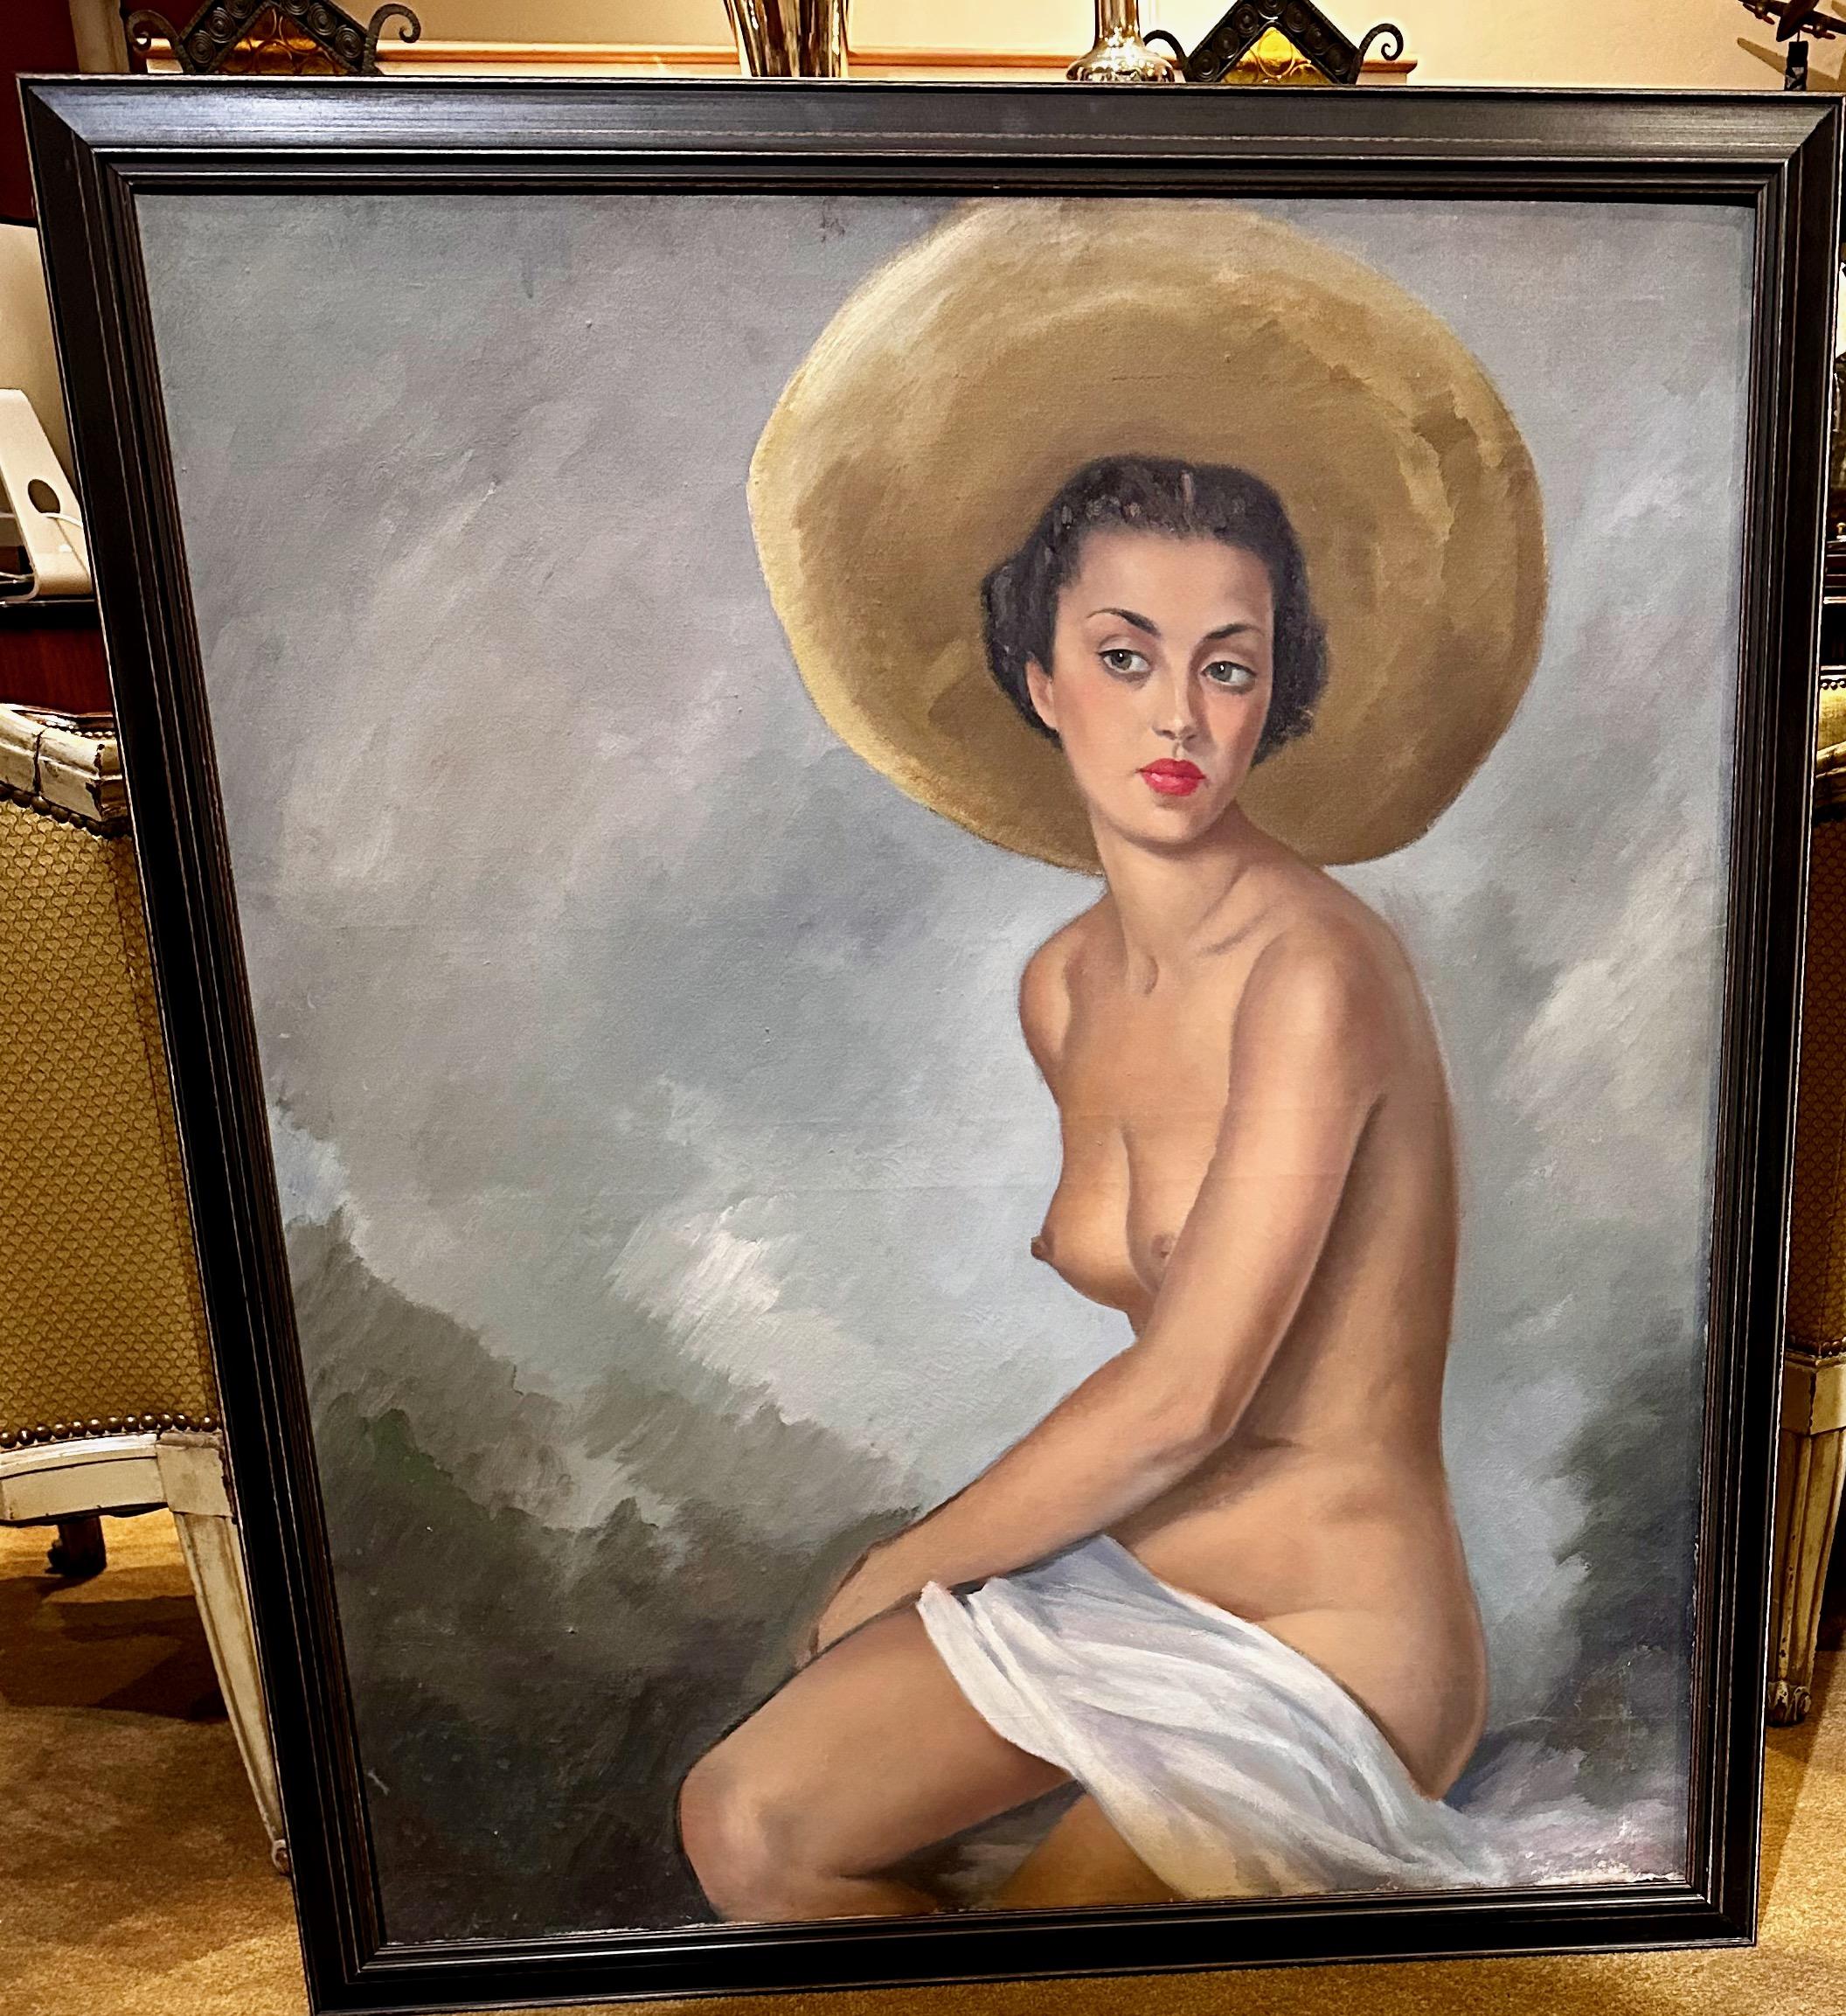 Original Art Deco Nude Painting Oil on Canvas. Beautiful young woman with a large straw hat posing with the horizon in the background. Spanish-style demure pose. Unsigned painting oil on canvas and purchased in Argentina.

Painting Canvas size: